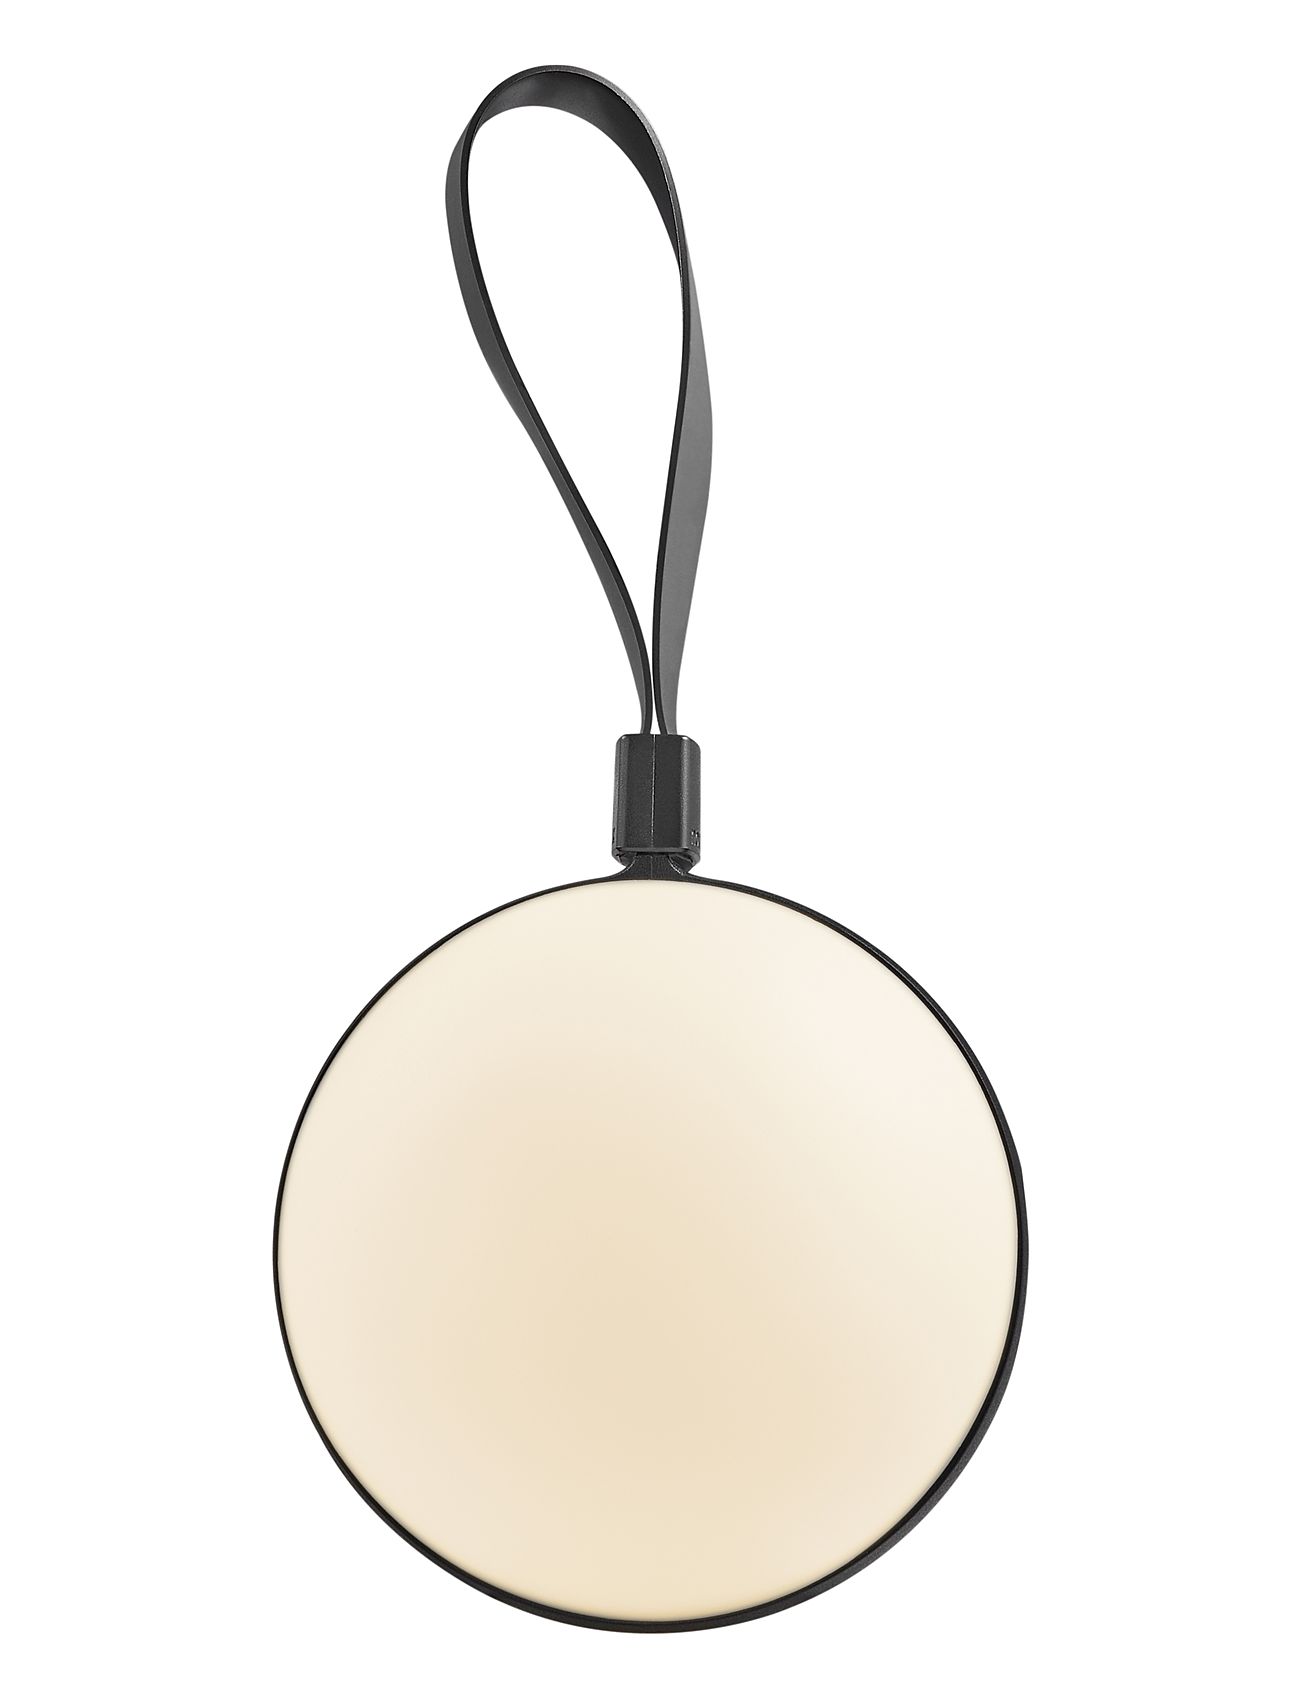 Bring To-Go 12 | Batterilampe | Home Lighting Lamps Ceiling Lamps Pendant Lamps Navy Nordlux